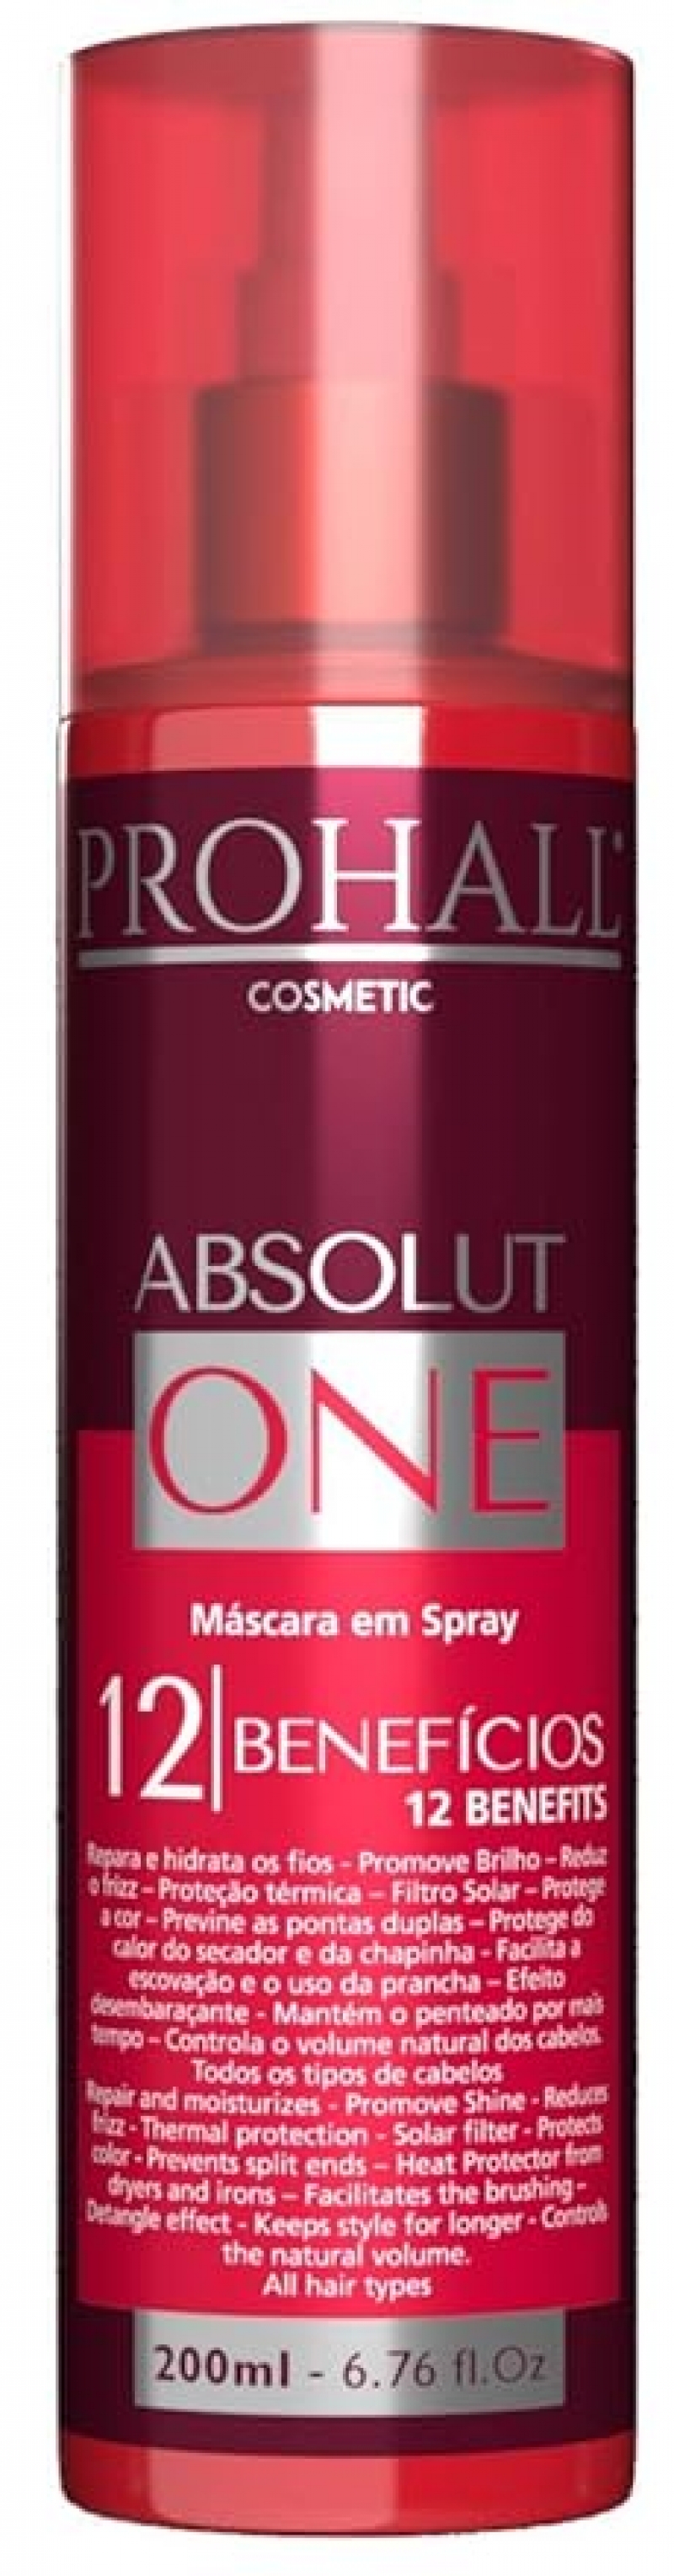 ihocon: Prohall Cosmetic Absolut One - Heat Protectant Spray for Hair - Leave in Thermal Protector Spray - Nourish & Hydrate Hair - Reduce Frizz & Prevent Split Ends抗熱護髮噴霧 6.76 fl. Oz